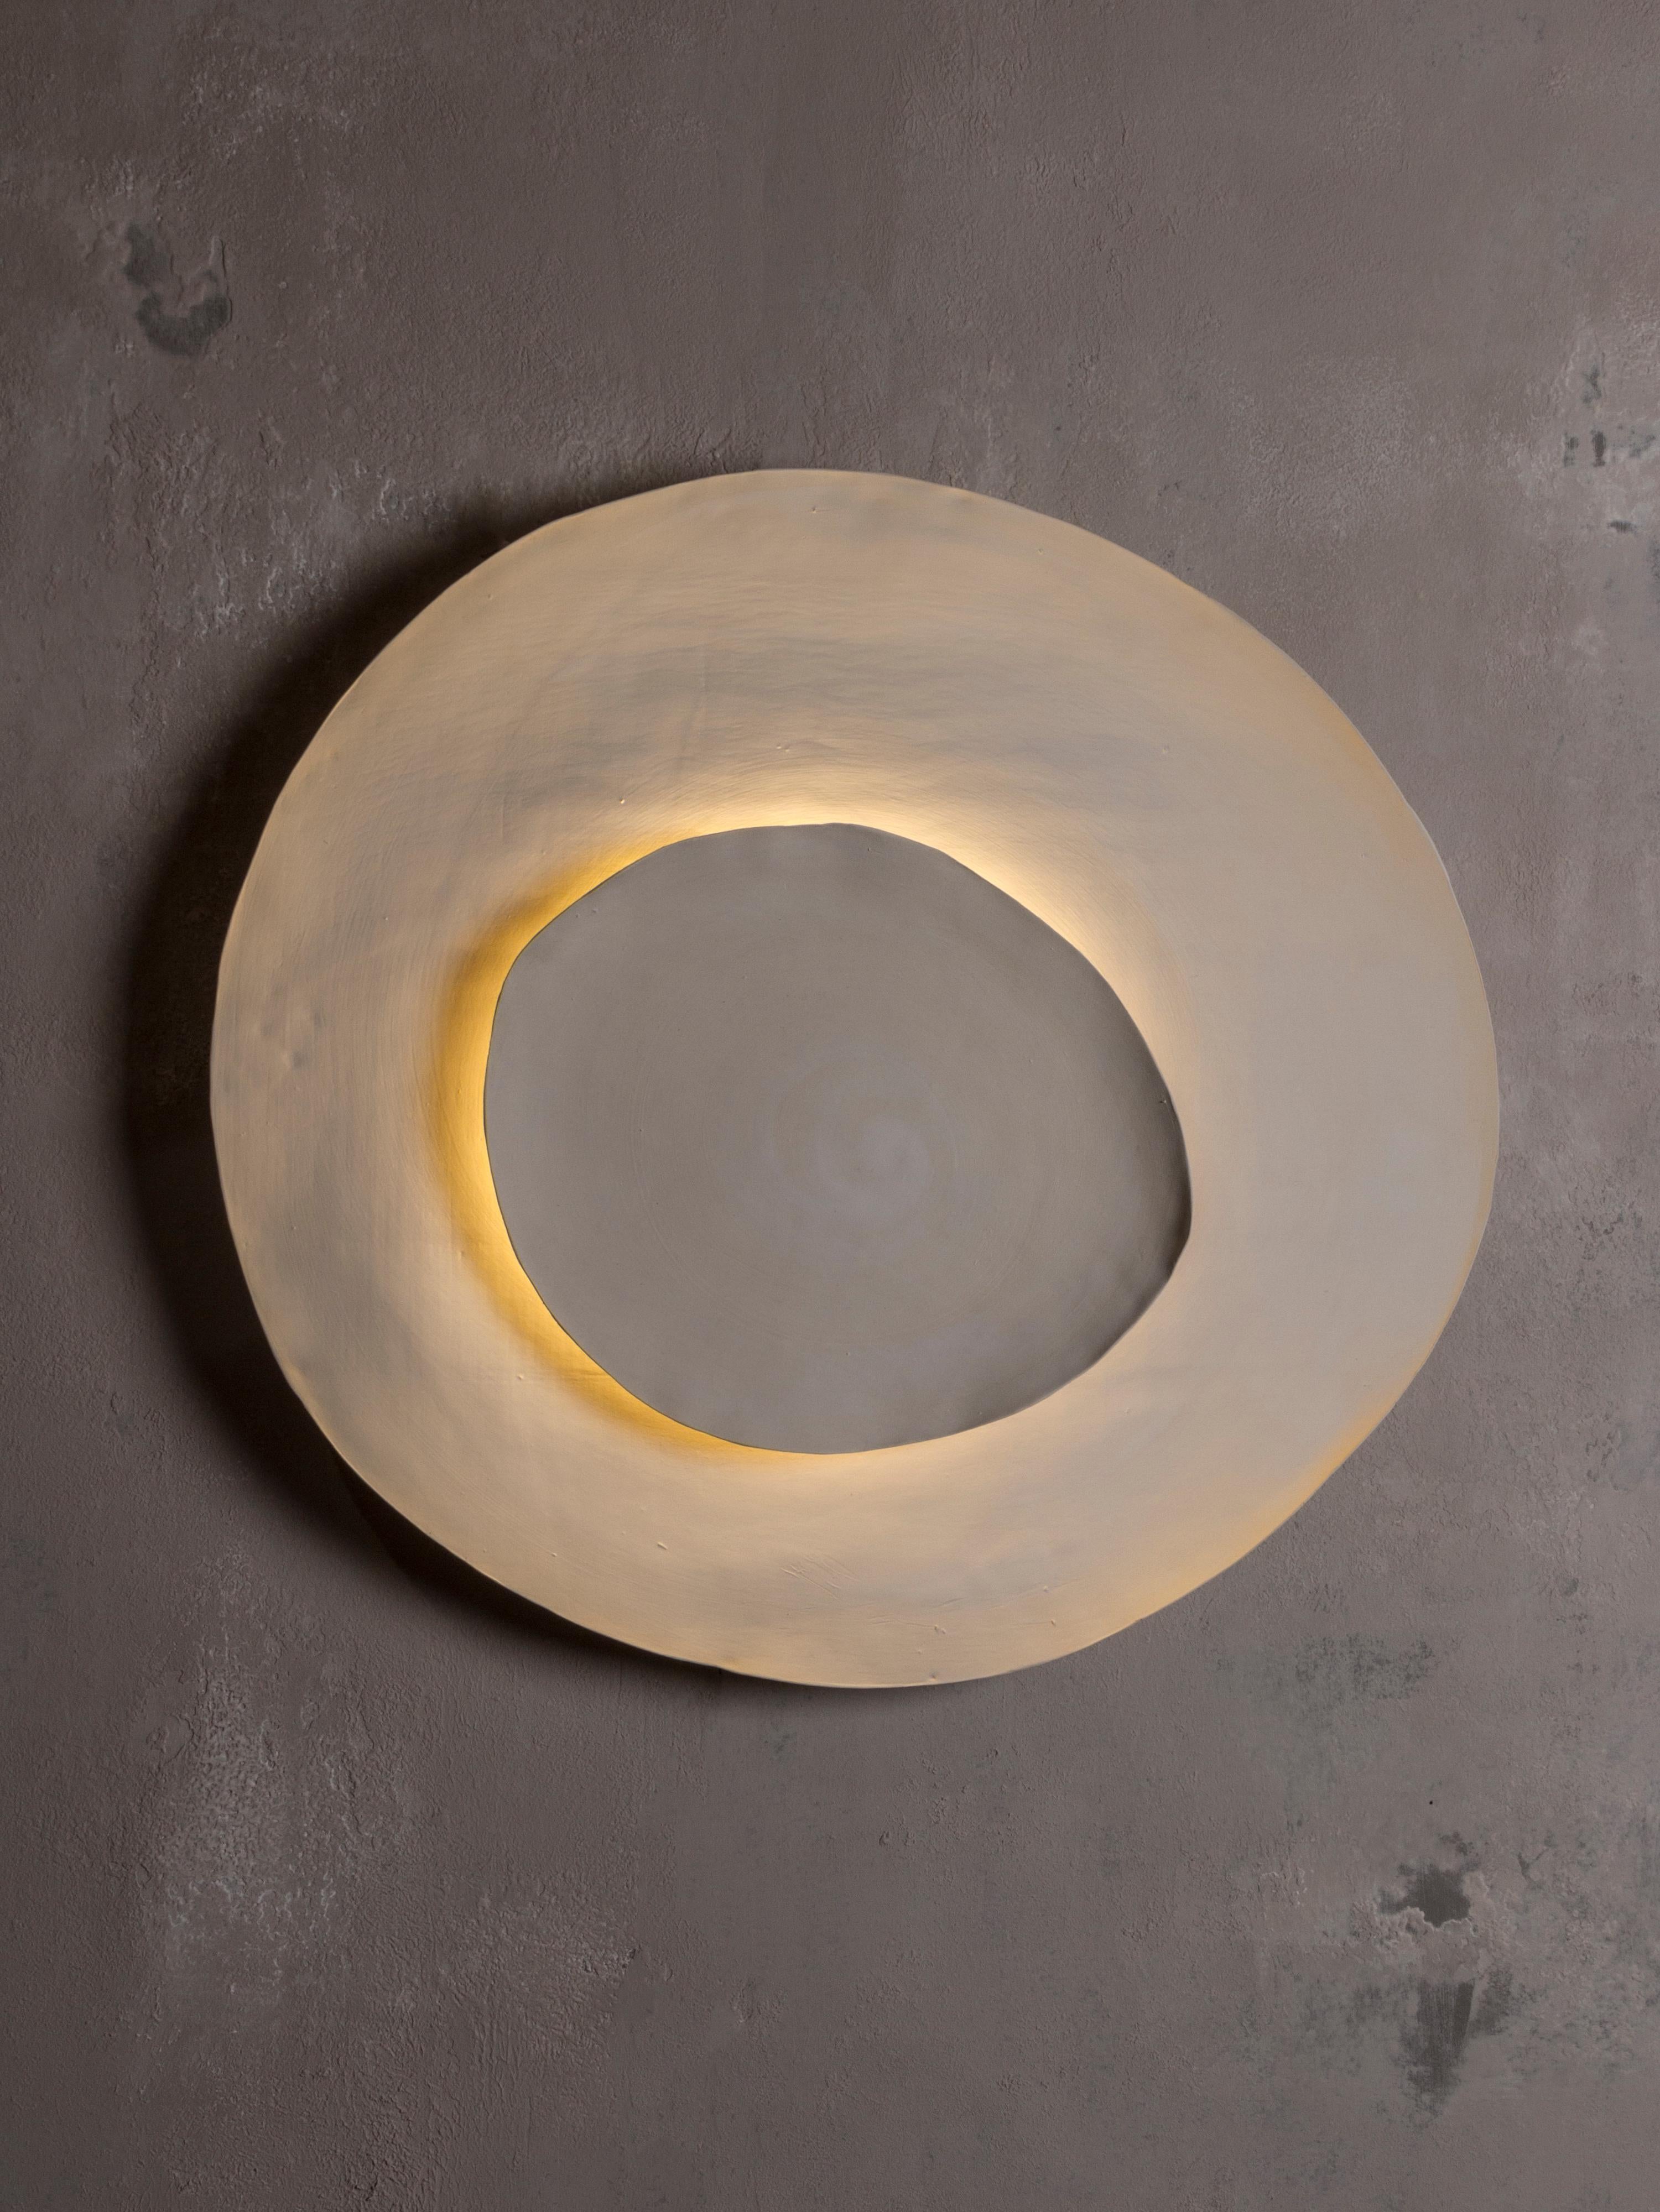 Silk #16 wall light by Margaux Leycuras
One of a Kind. Signed and numbered.
Dimensions: Ø 54 x H 57 cm.
Material: Ceramic, sandy stoneware platters with a porcelain slip finish.
The piece is signed, numbered and delivered with a certificate of